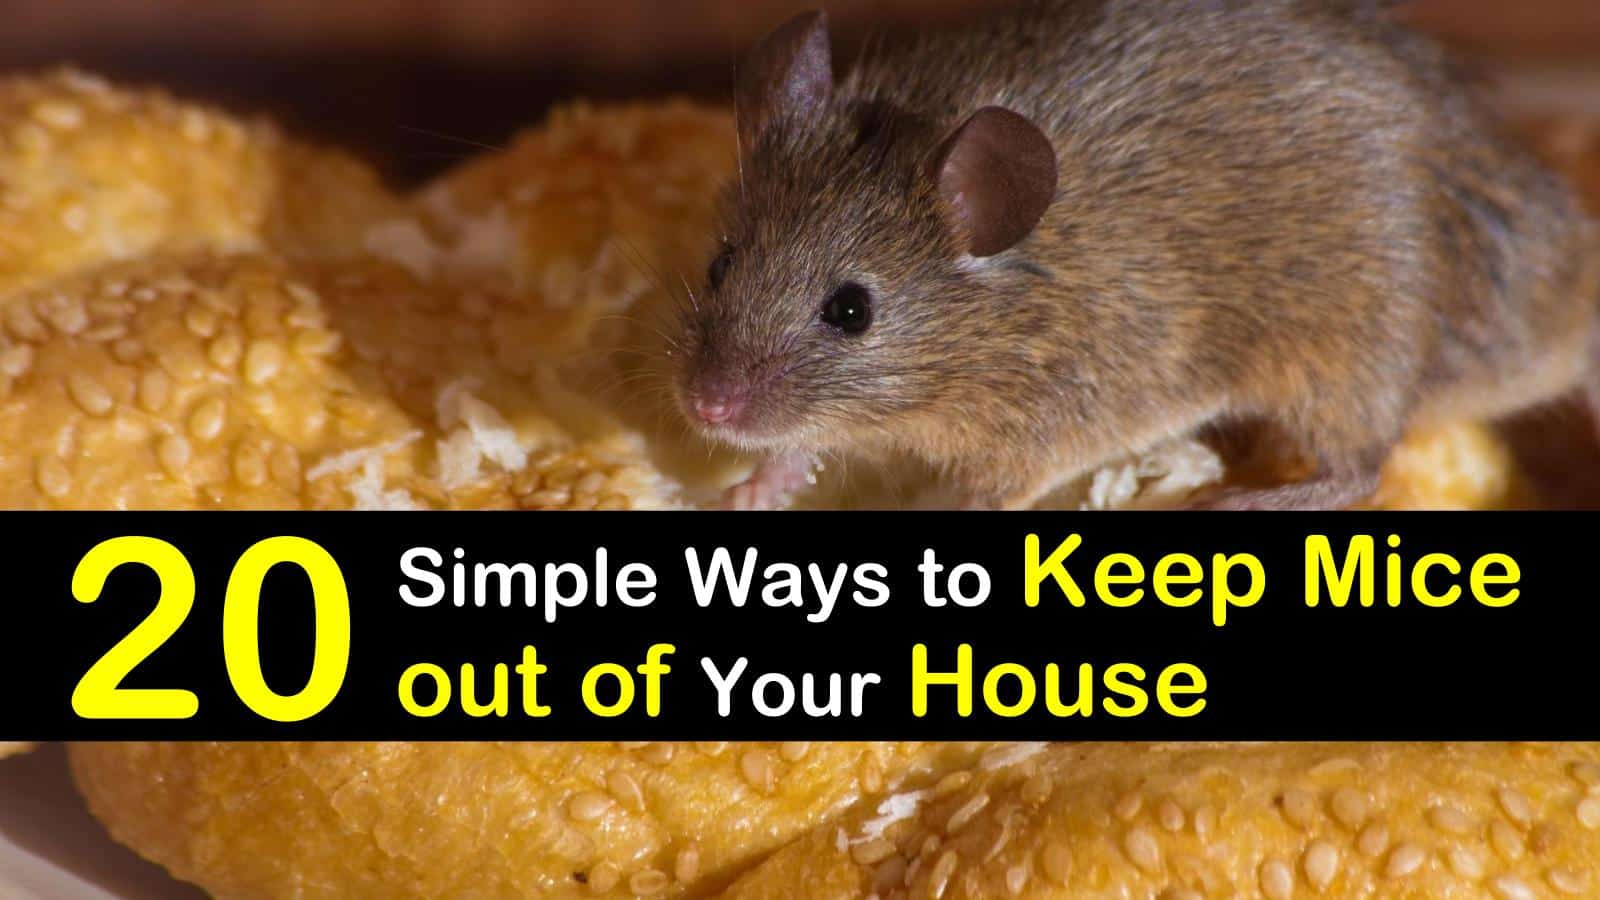 how to keep mice out of your house titleimg1